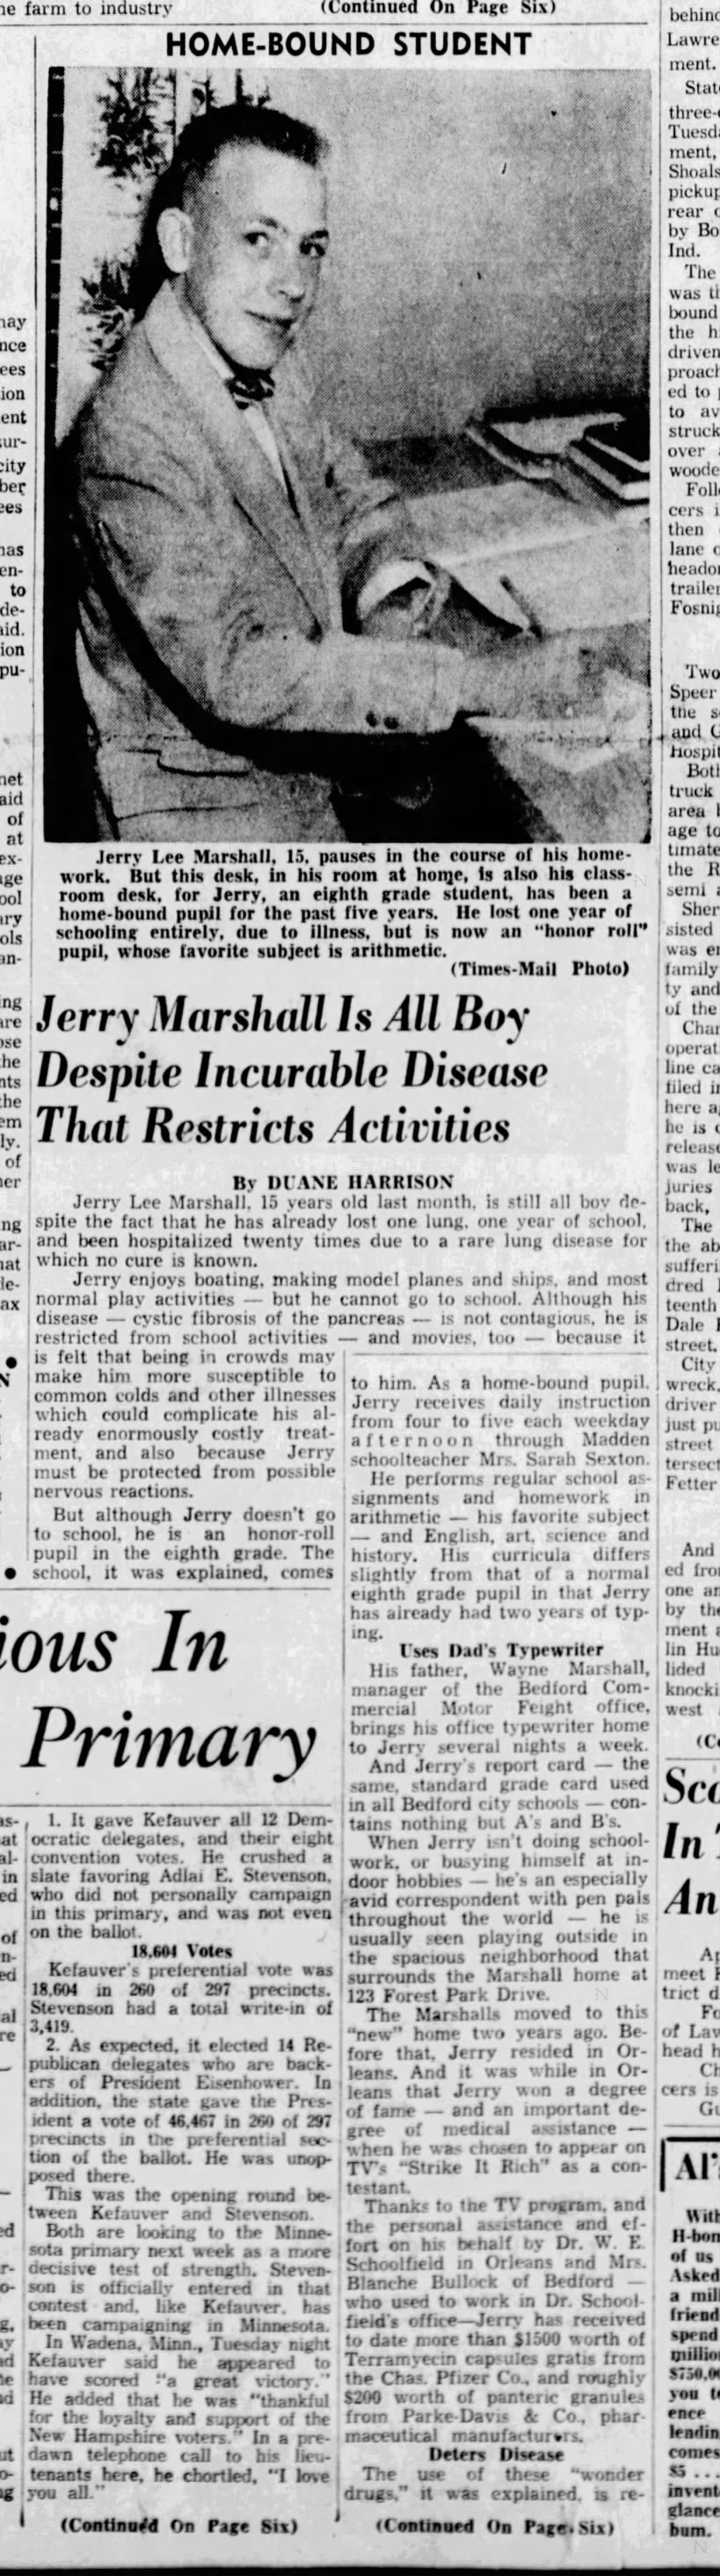 1956 march 14 jerry marshall